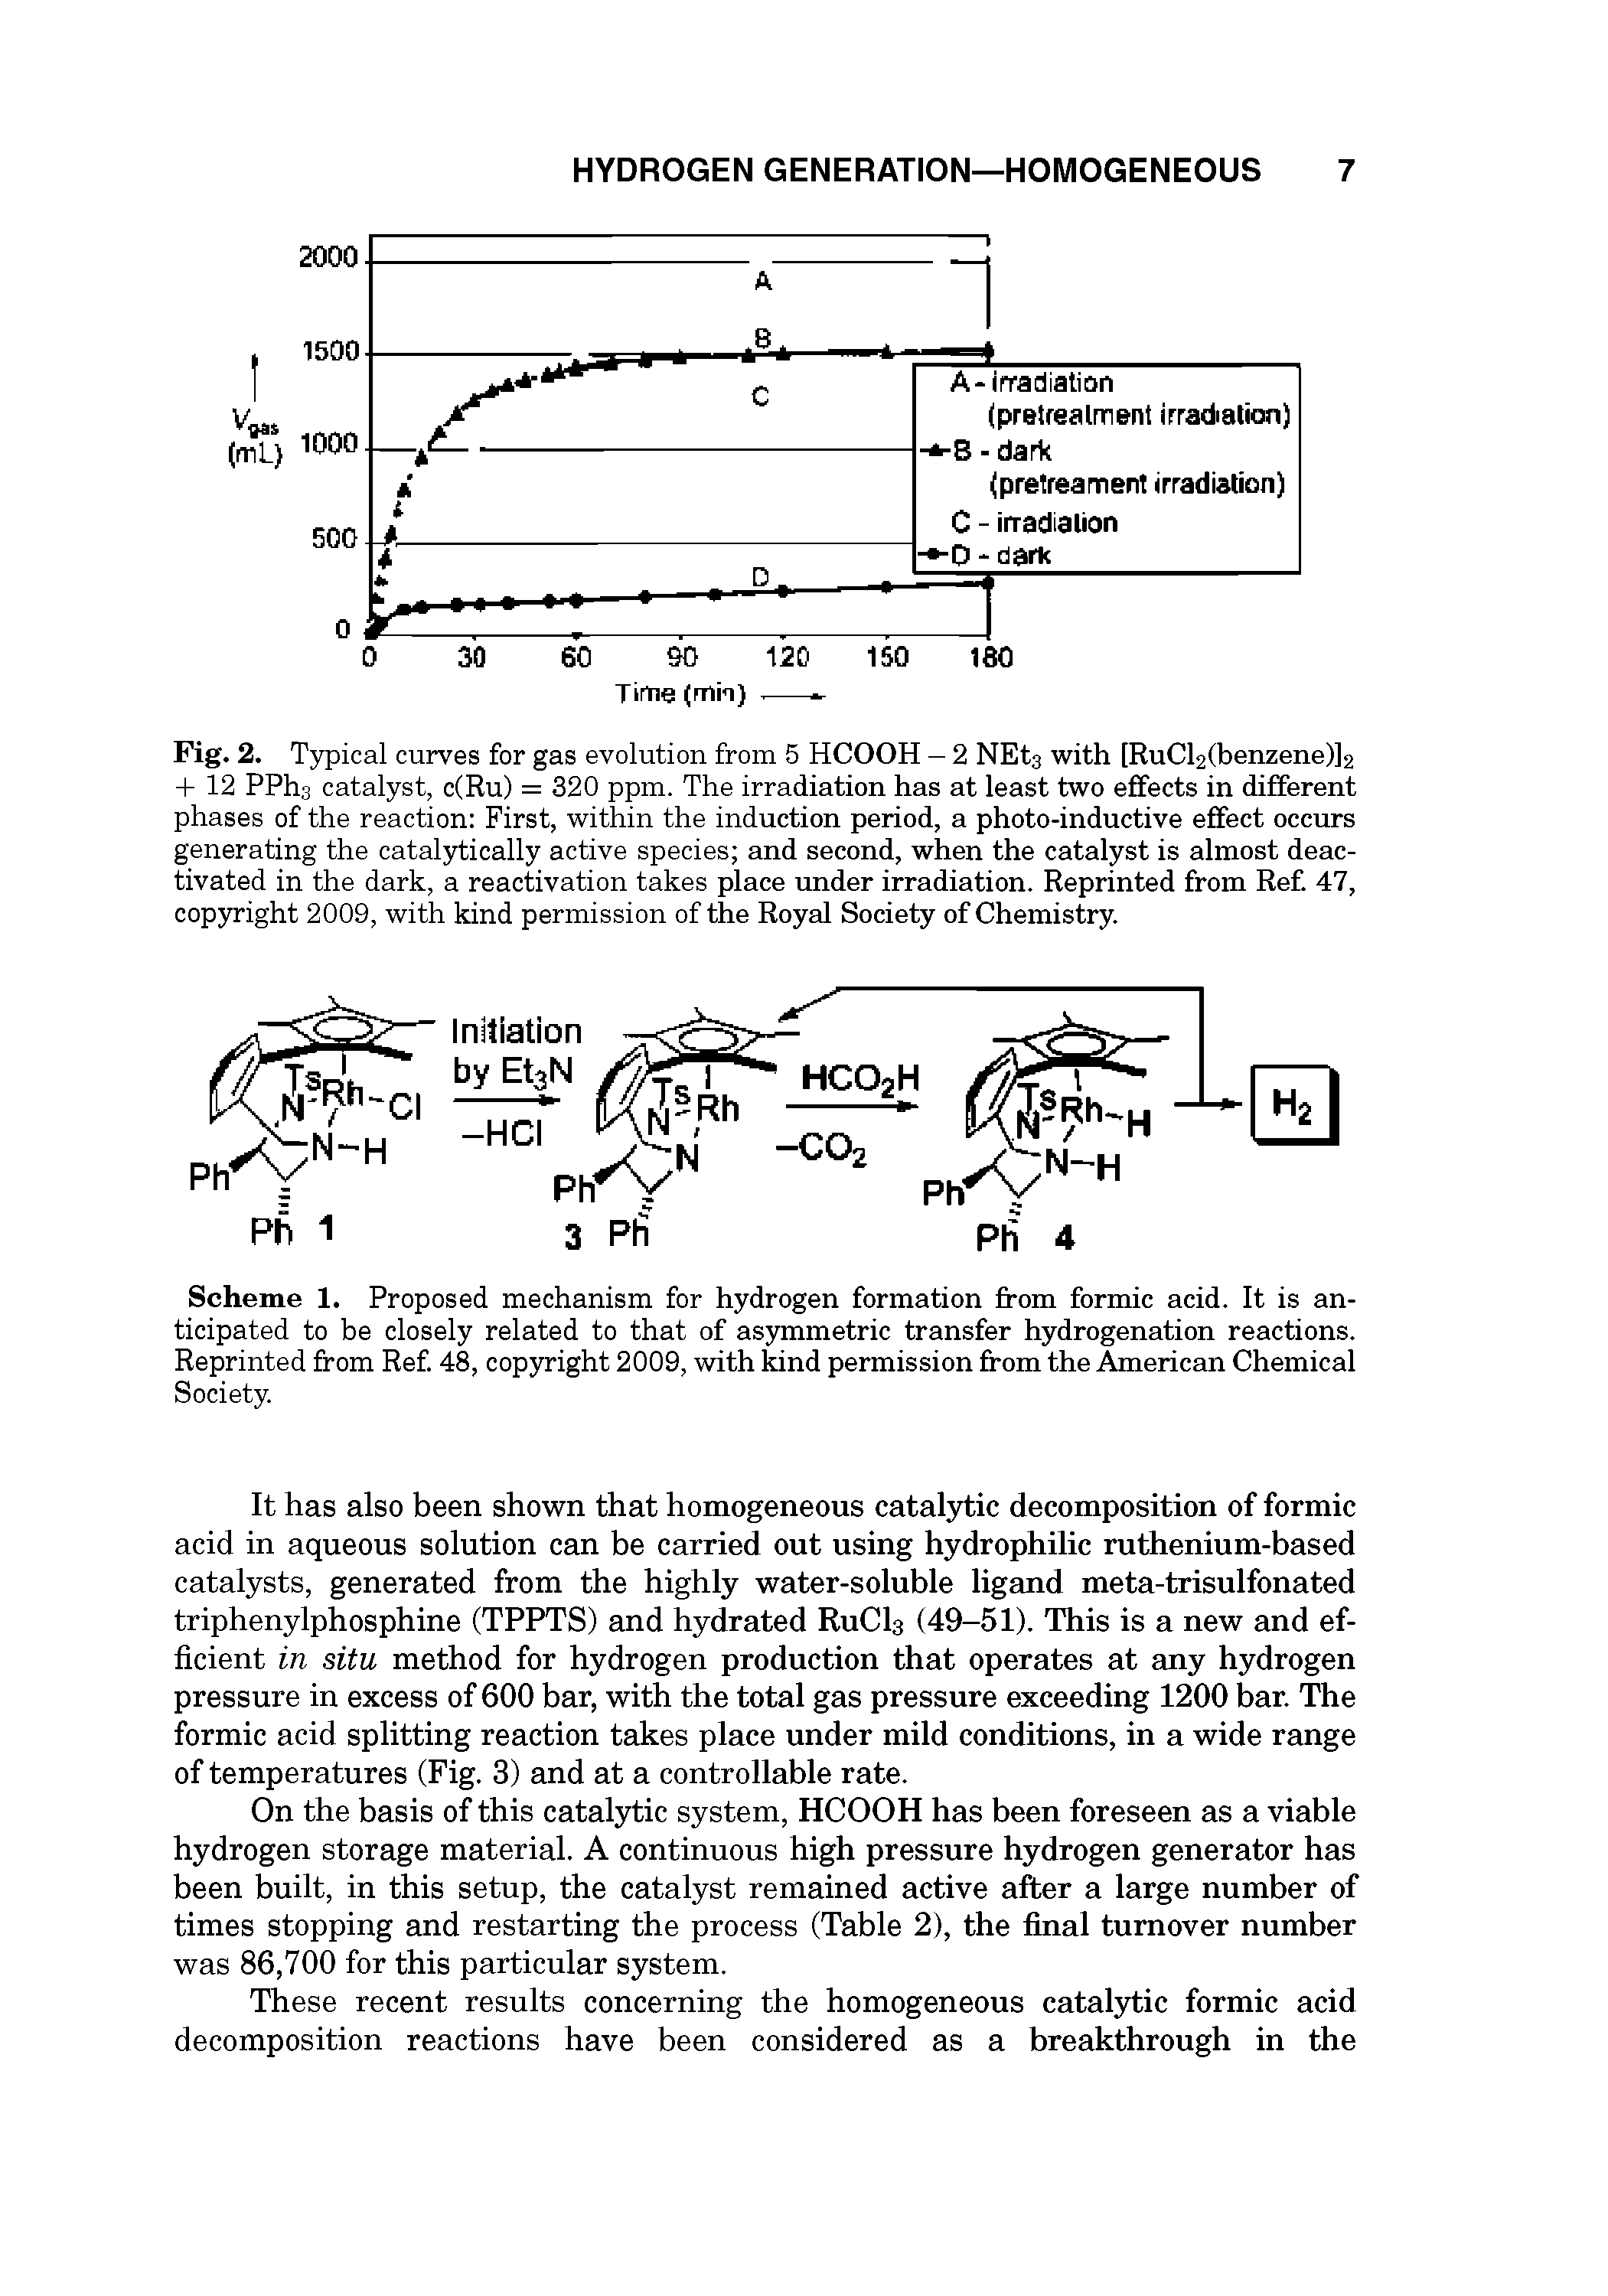 Scheme 1. Proposed mechanism for hydrogen formation from formic acid. It is anticipated to be closely related to that of asymmetric transfer hydrogenation reactions. Reprinted from Ref 48, copyright 2009, with kind permission from the American Chemical...